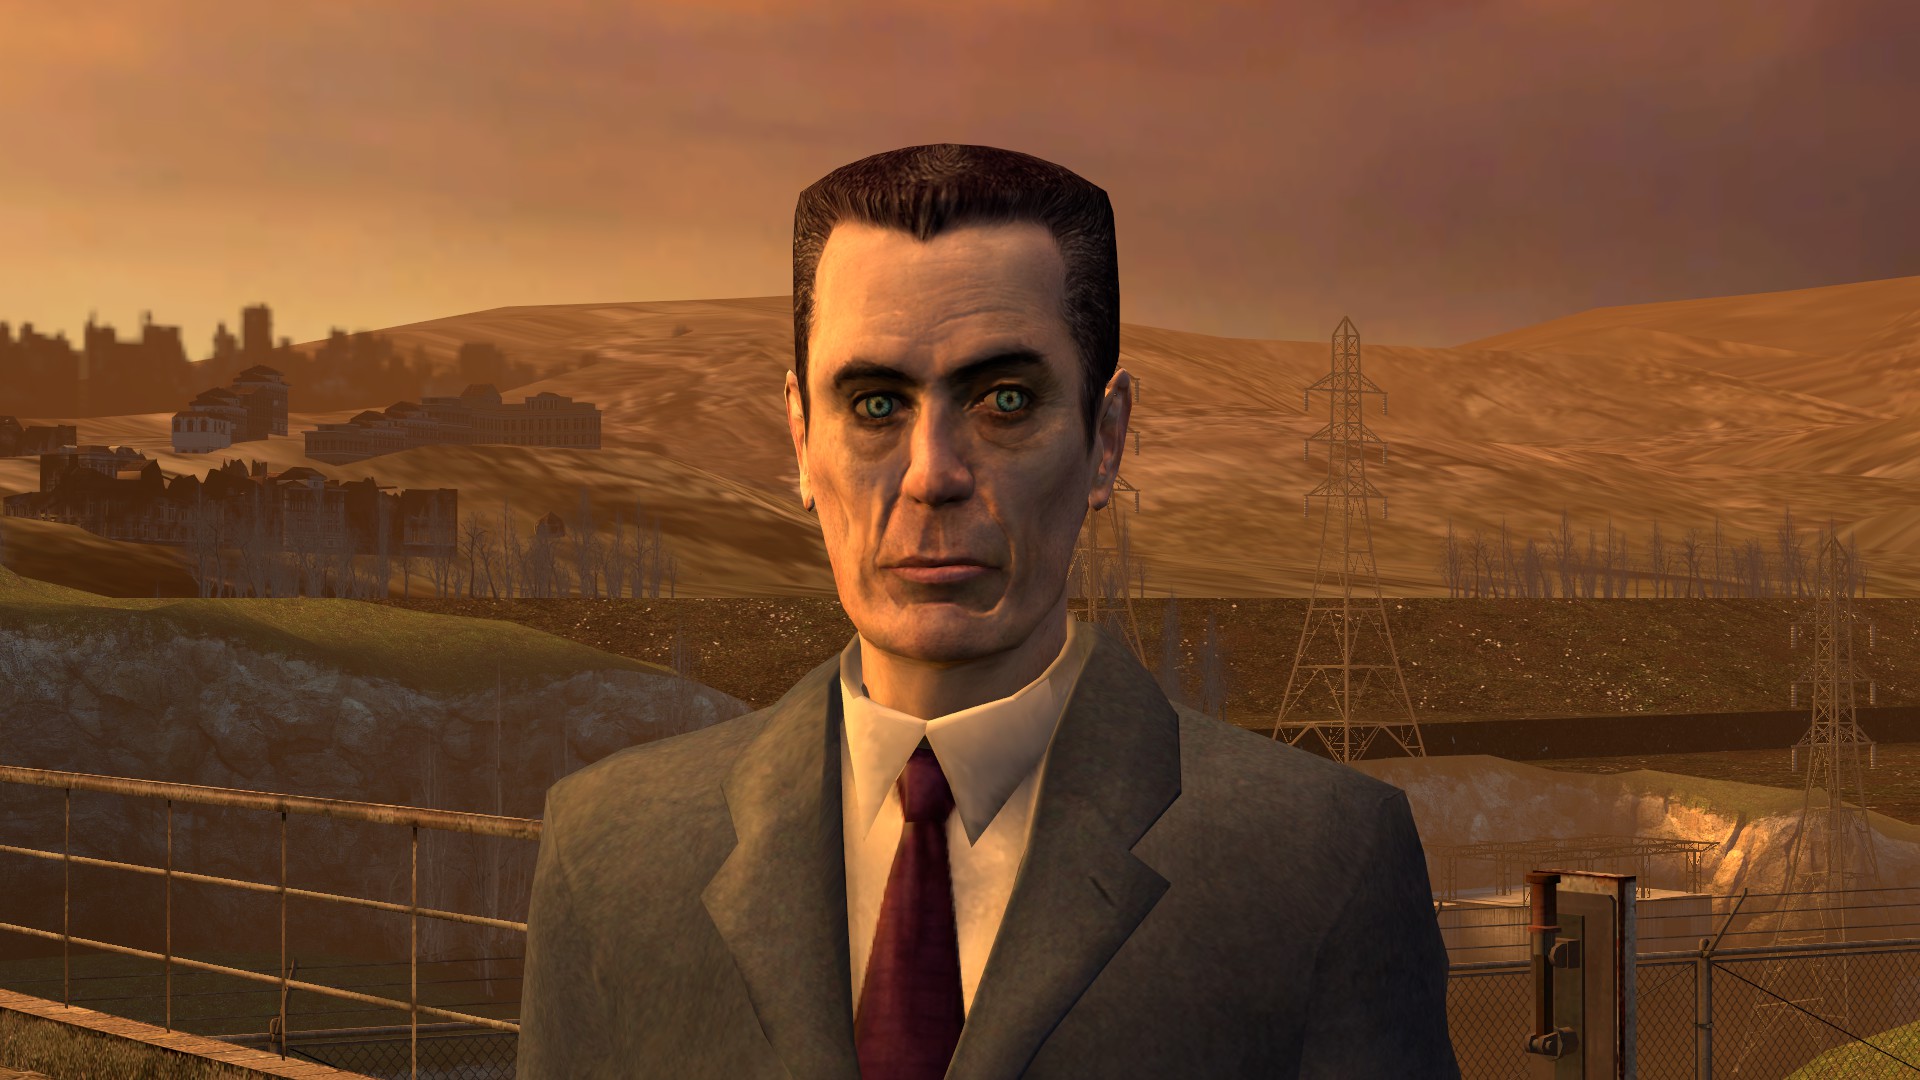 6 Image taken from the facial animation of the ”g-man” in Half Life 2